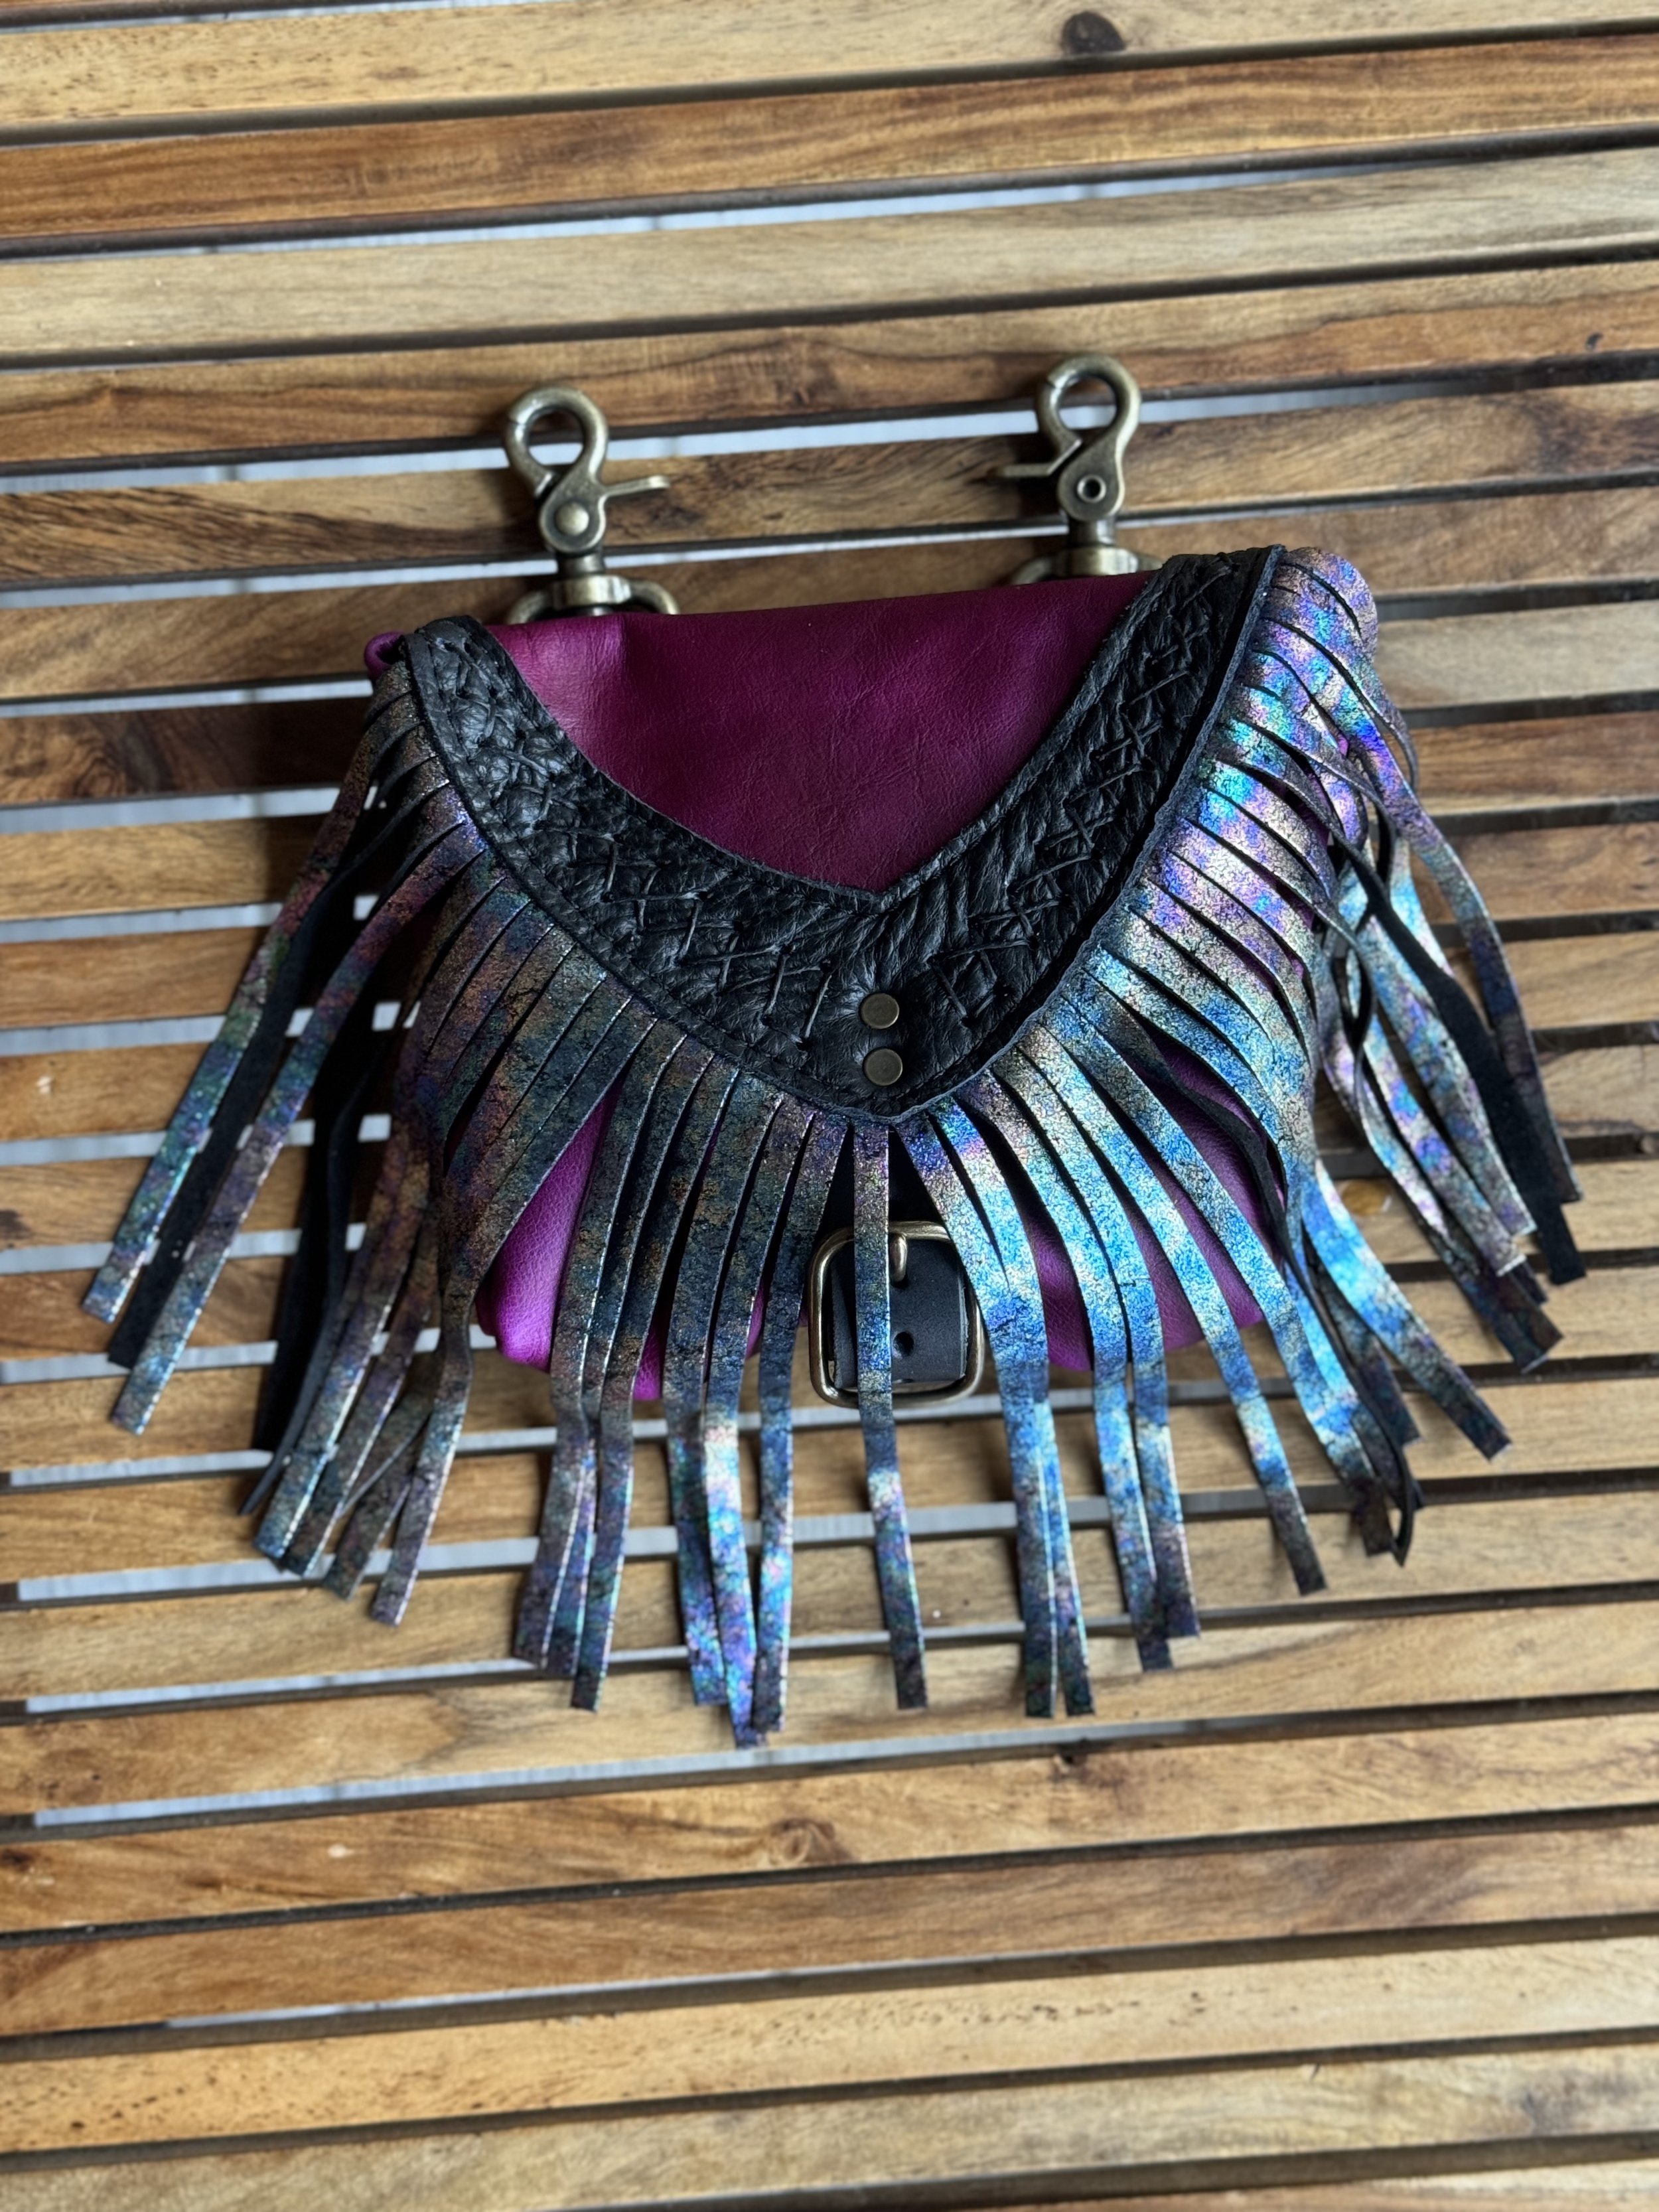 Hand dyed purple leather body, Antique Marble leather fringe, Black bison leather trim, antique brass hardware, black criss cross handstitching - On The Road Convertible Hip Bag